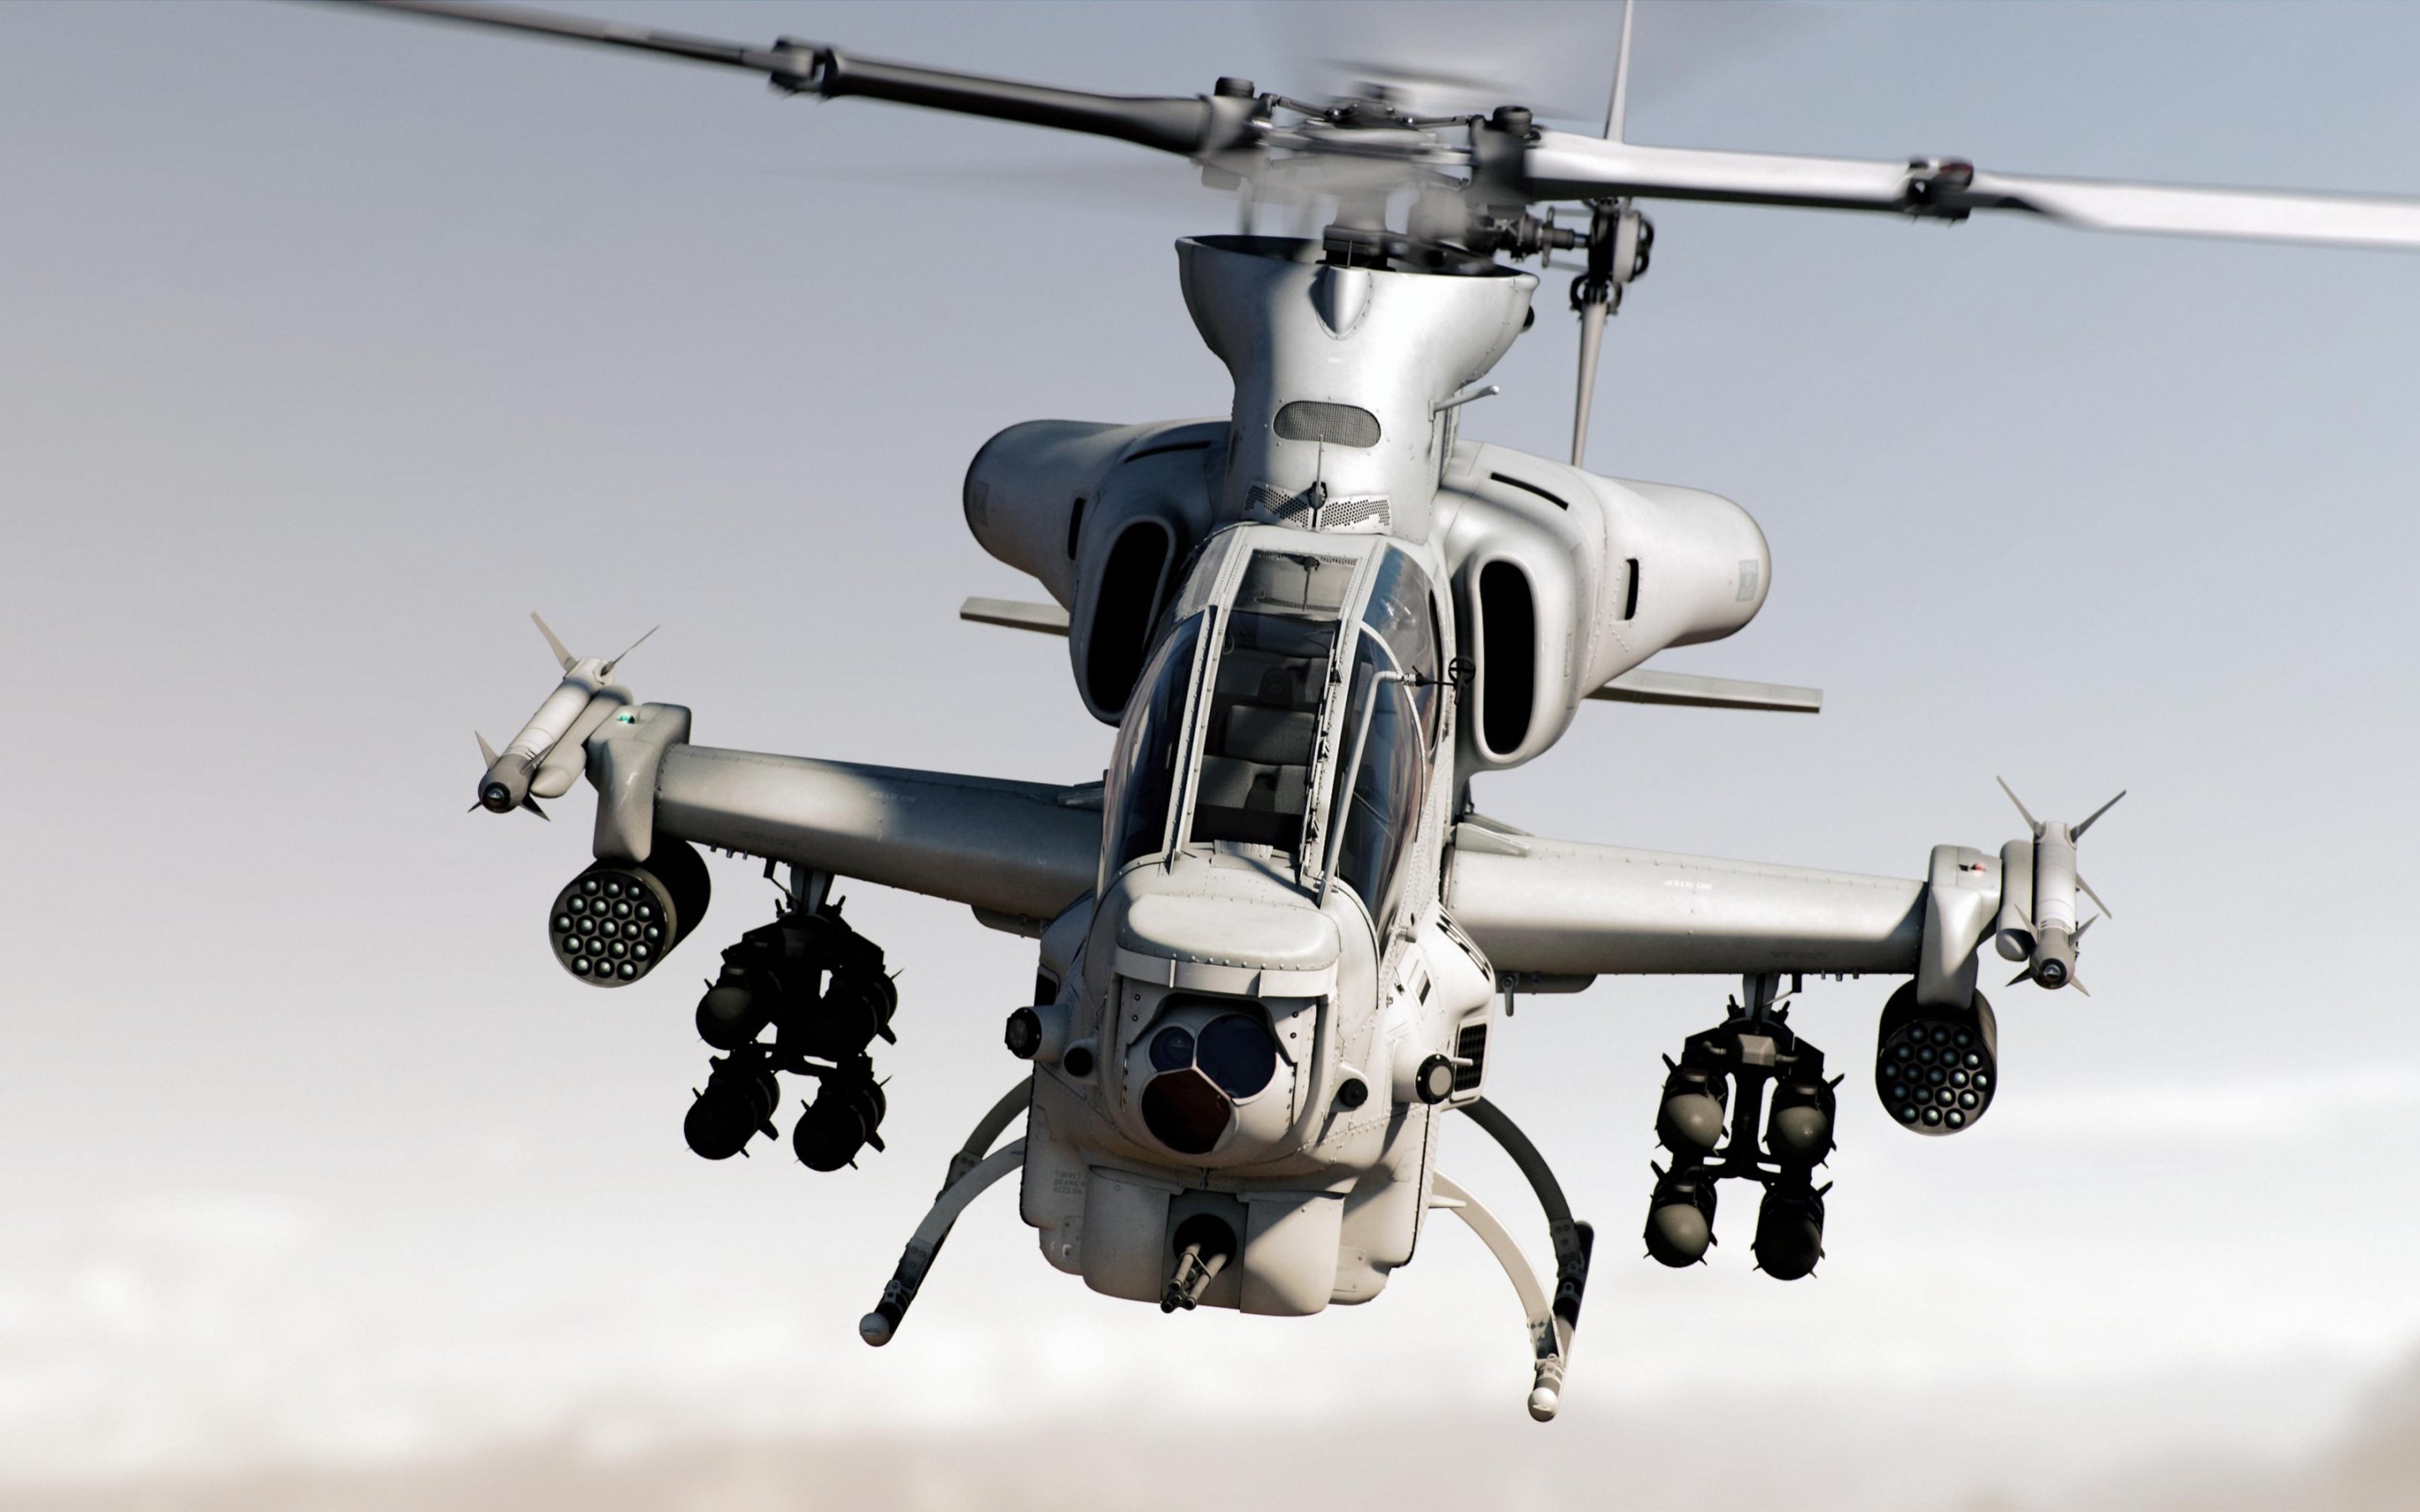 2880x1800 Tags: Bell AH-1Z Viper, Attack helicopter, US Marine Corps, HD